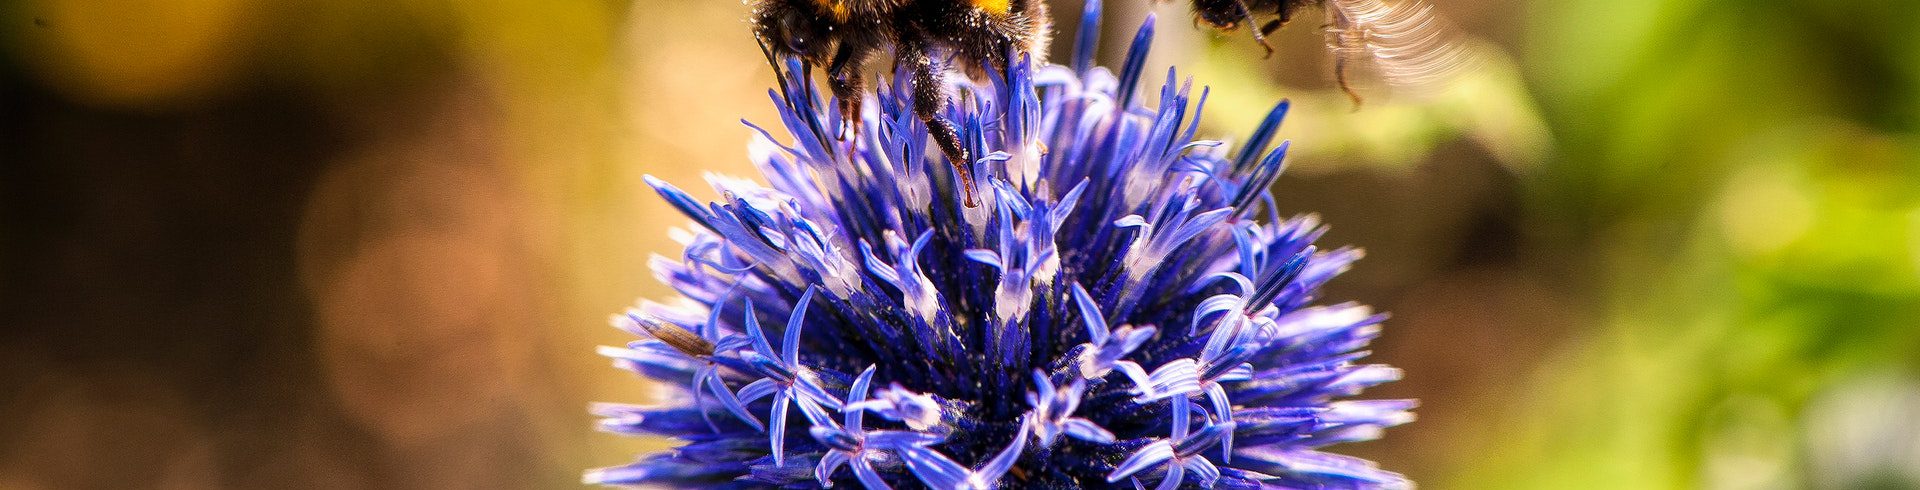 A photo of bees and a flower